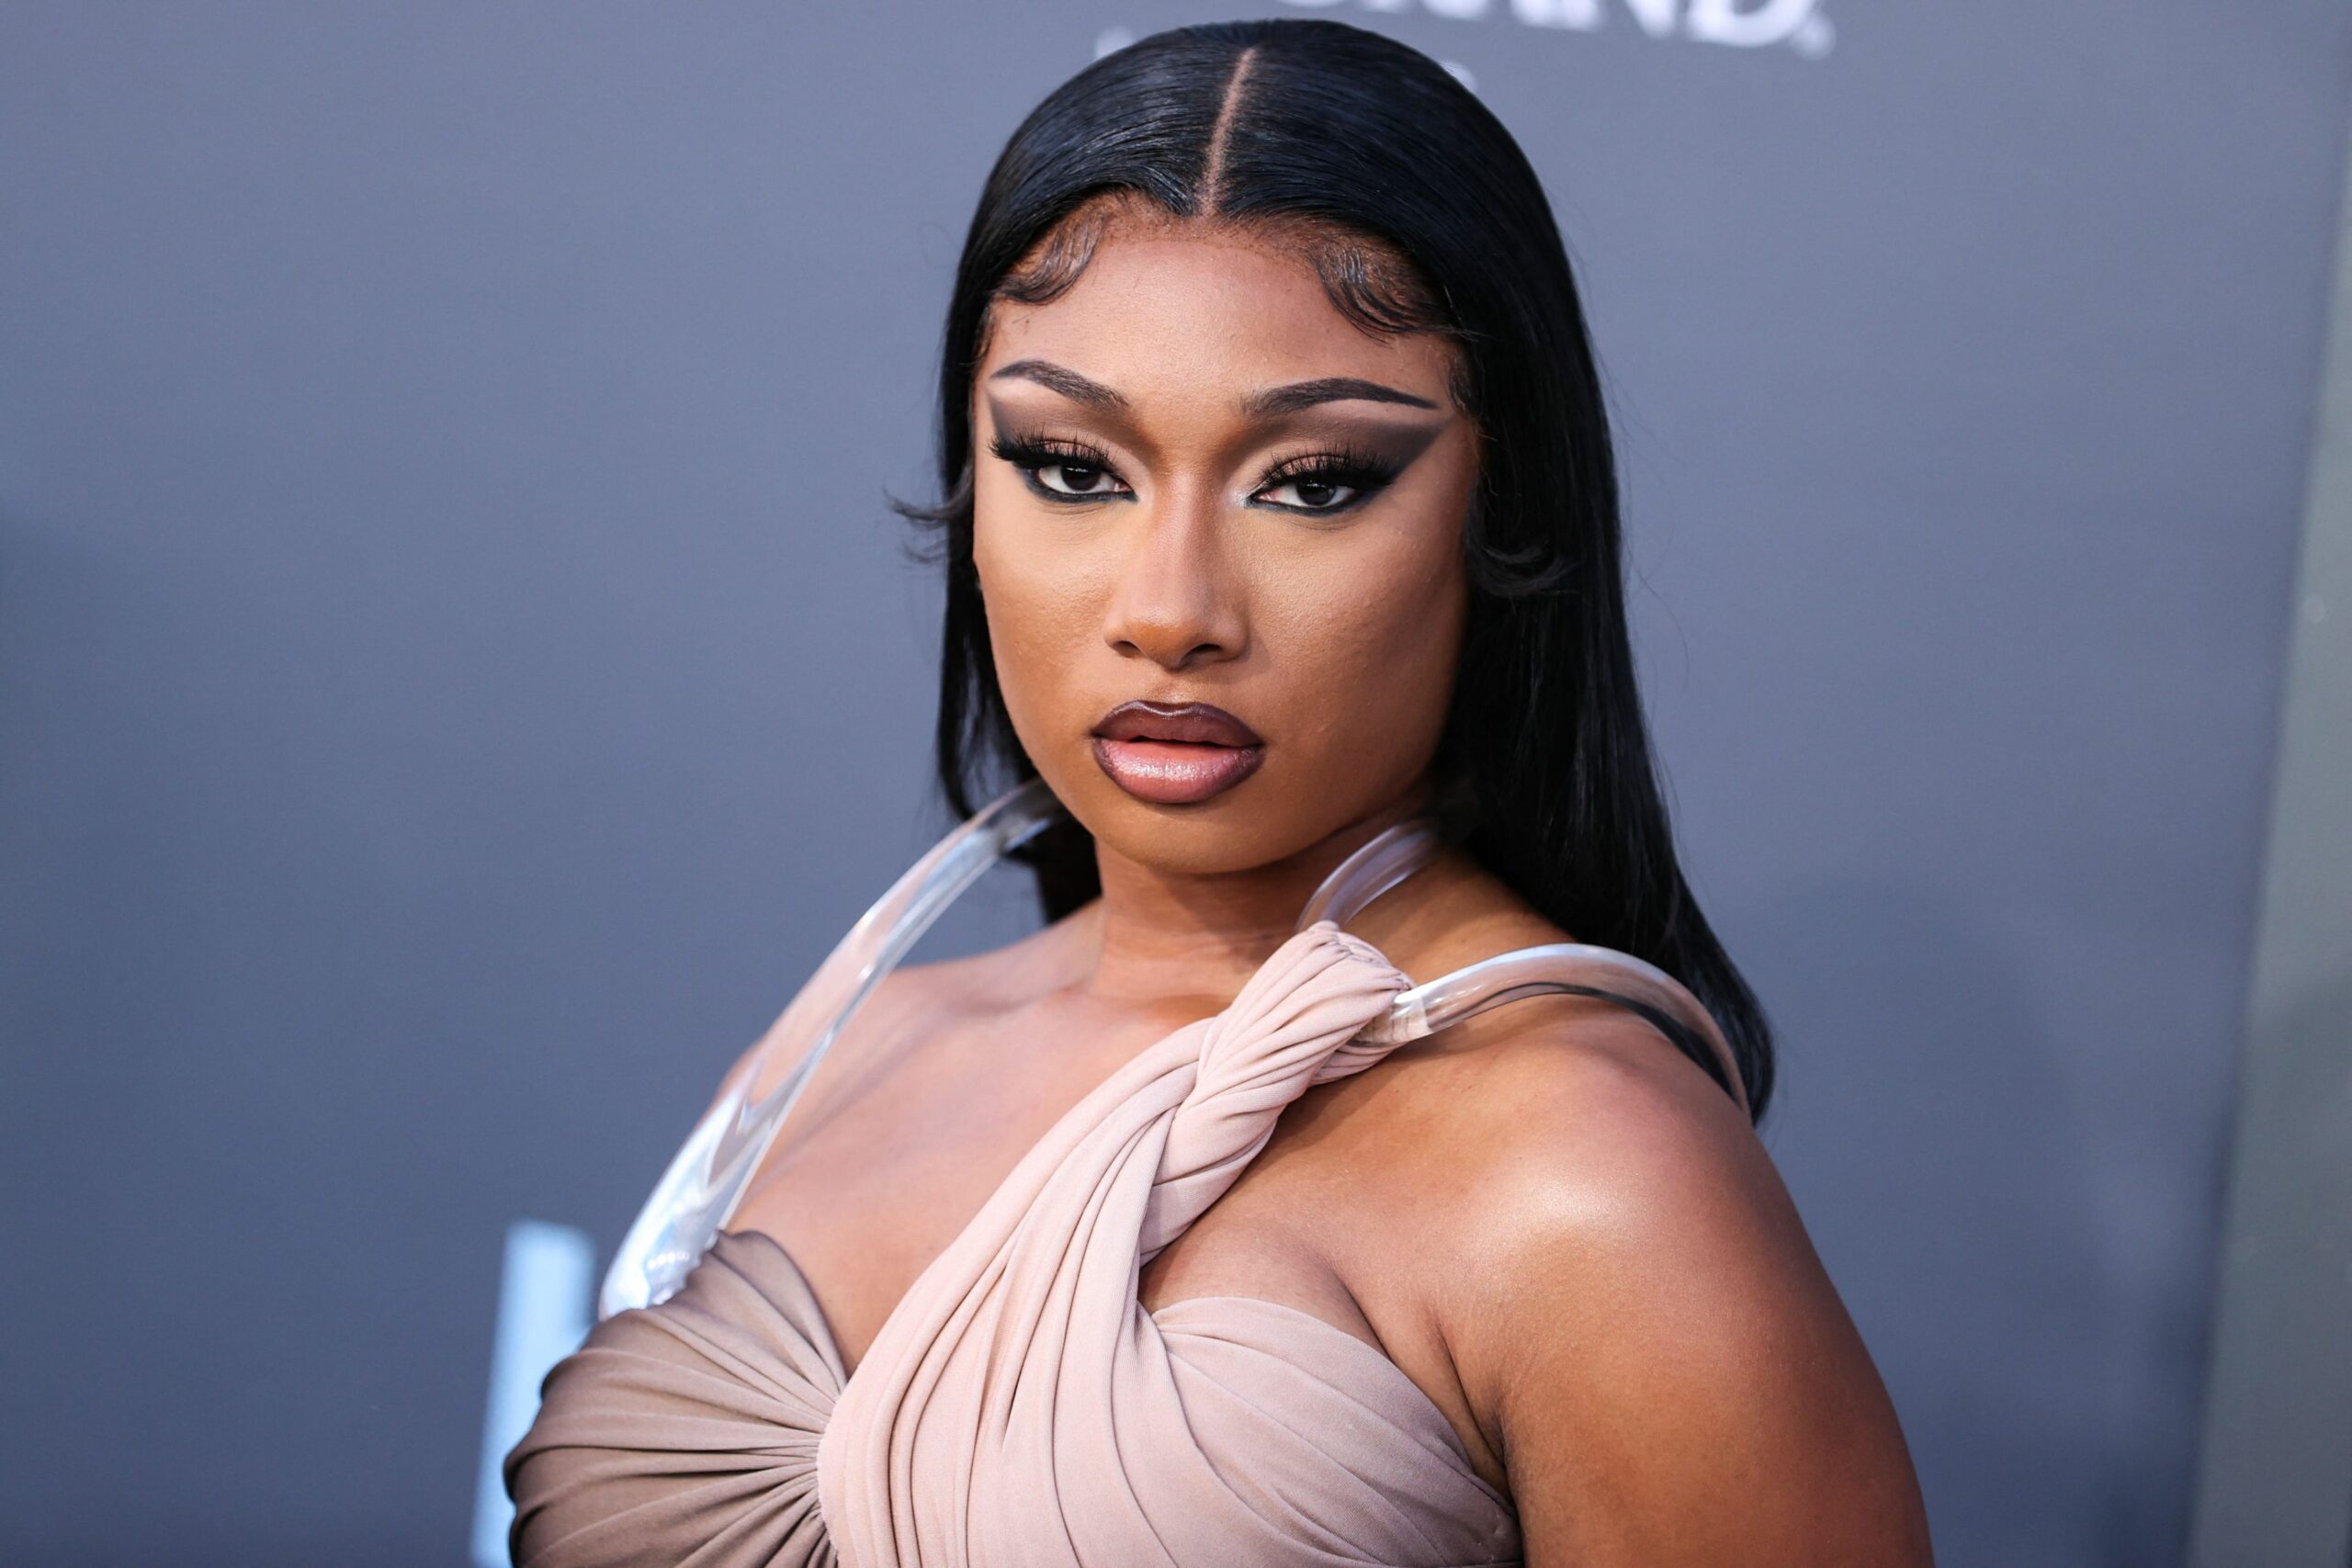 Actress is her middle name. Megan Thee Stallion, rol în serialul She Hulk: Attorney at law